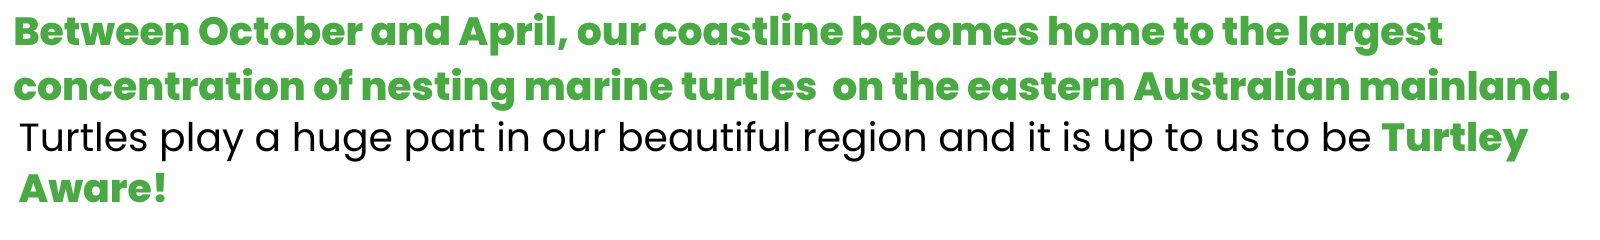 Turtle Awareness - Text banner